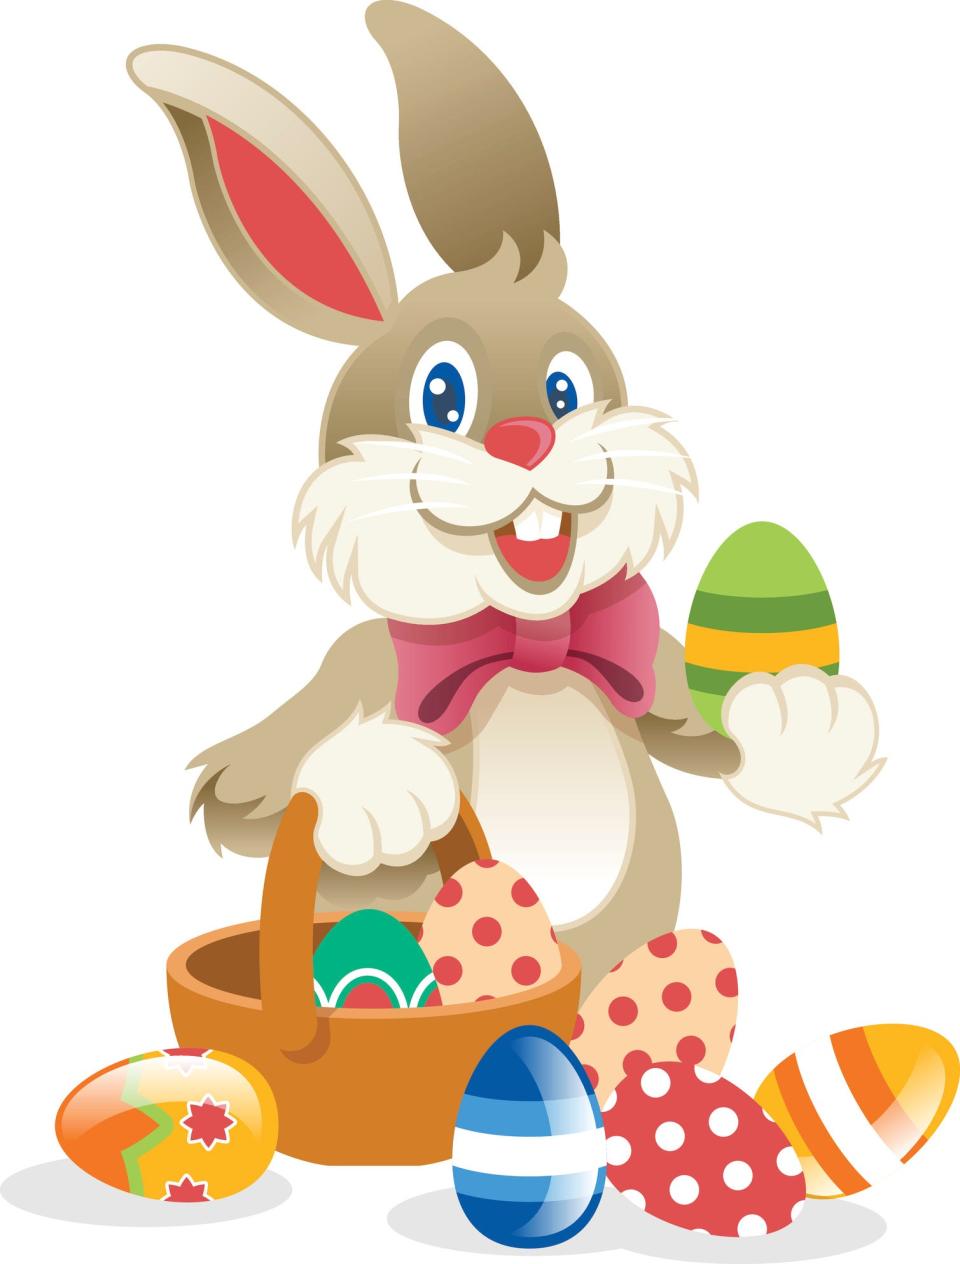 The Easter Bunny will use his magic to appear at many, many events this weekend!